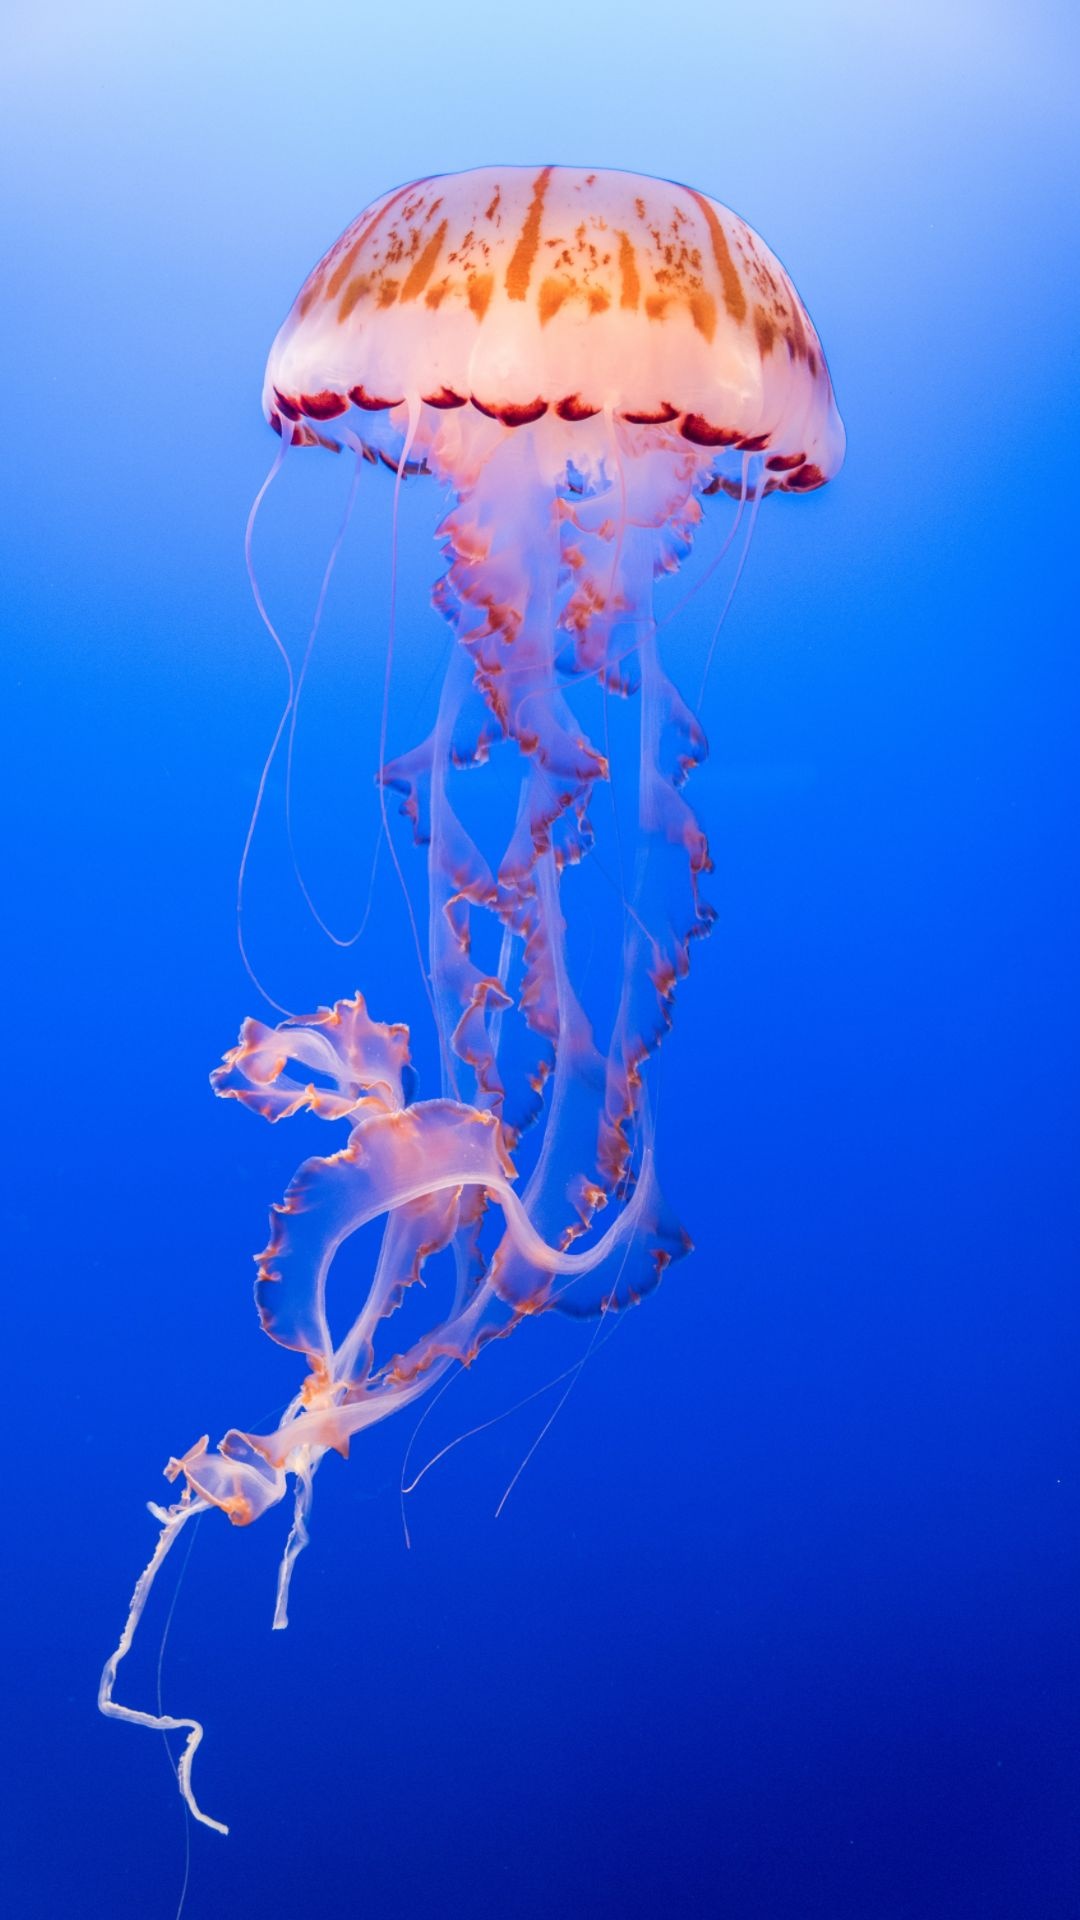 High-quality jellyfish wallpapers, Top downloads, Wallpaper excellence, Jellyfish wonders, 1080x1920 Full HD Phone